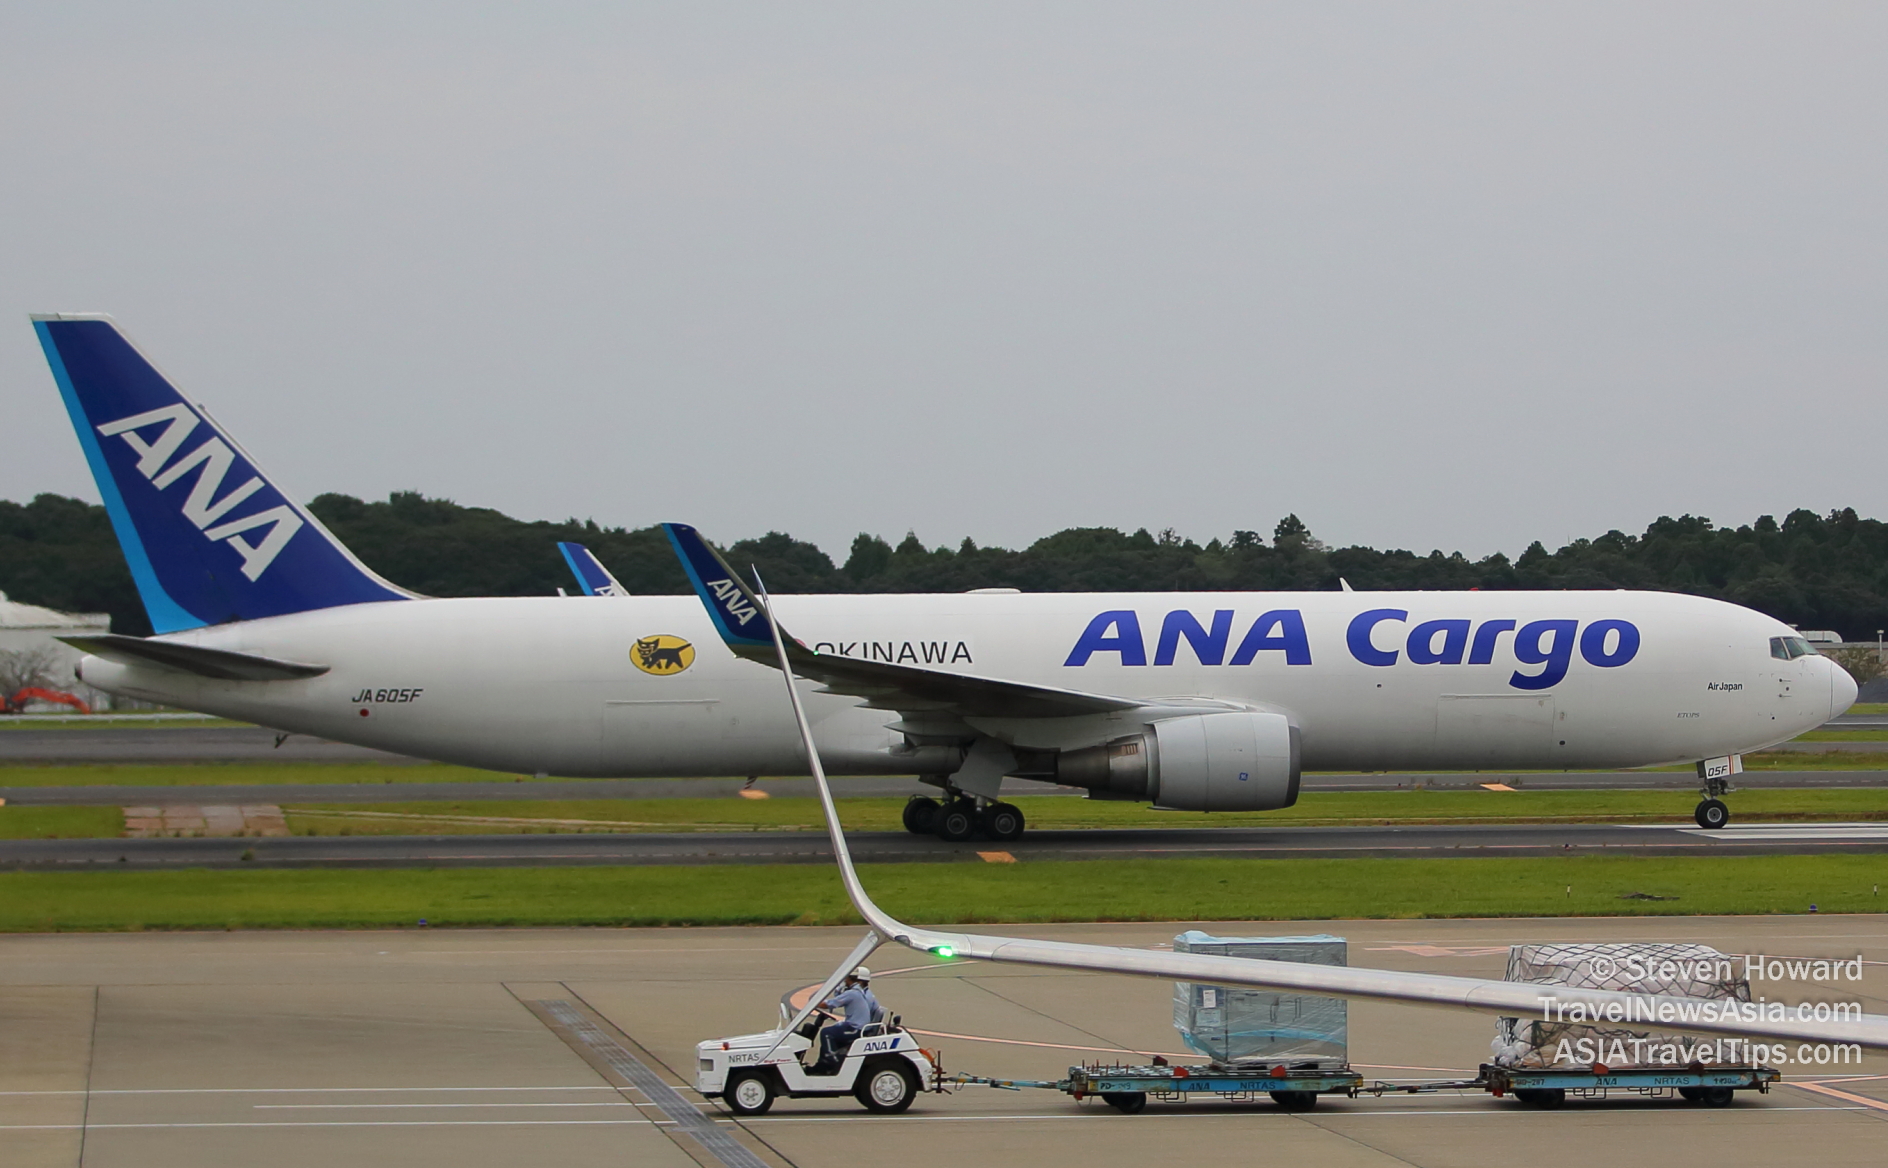 ANA Cargo Boeing 767F reg: JA605F. Picture by Steven Howard of TravelNewsAsia.com Click to enlarge.